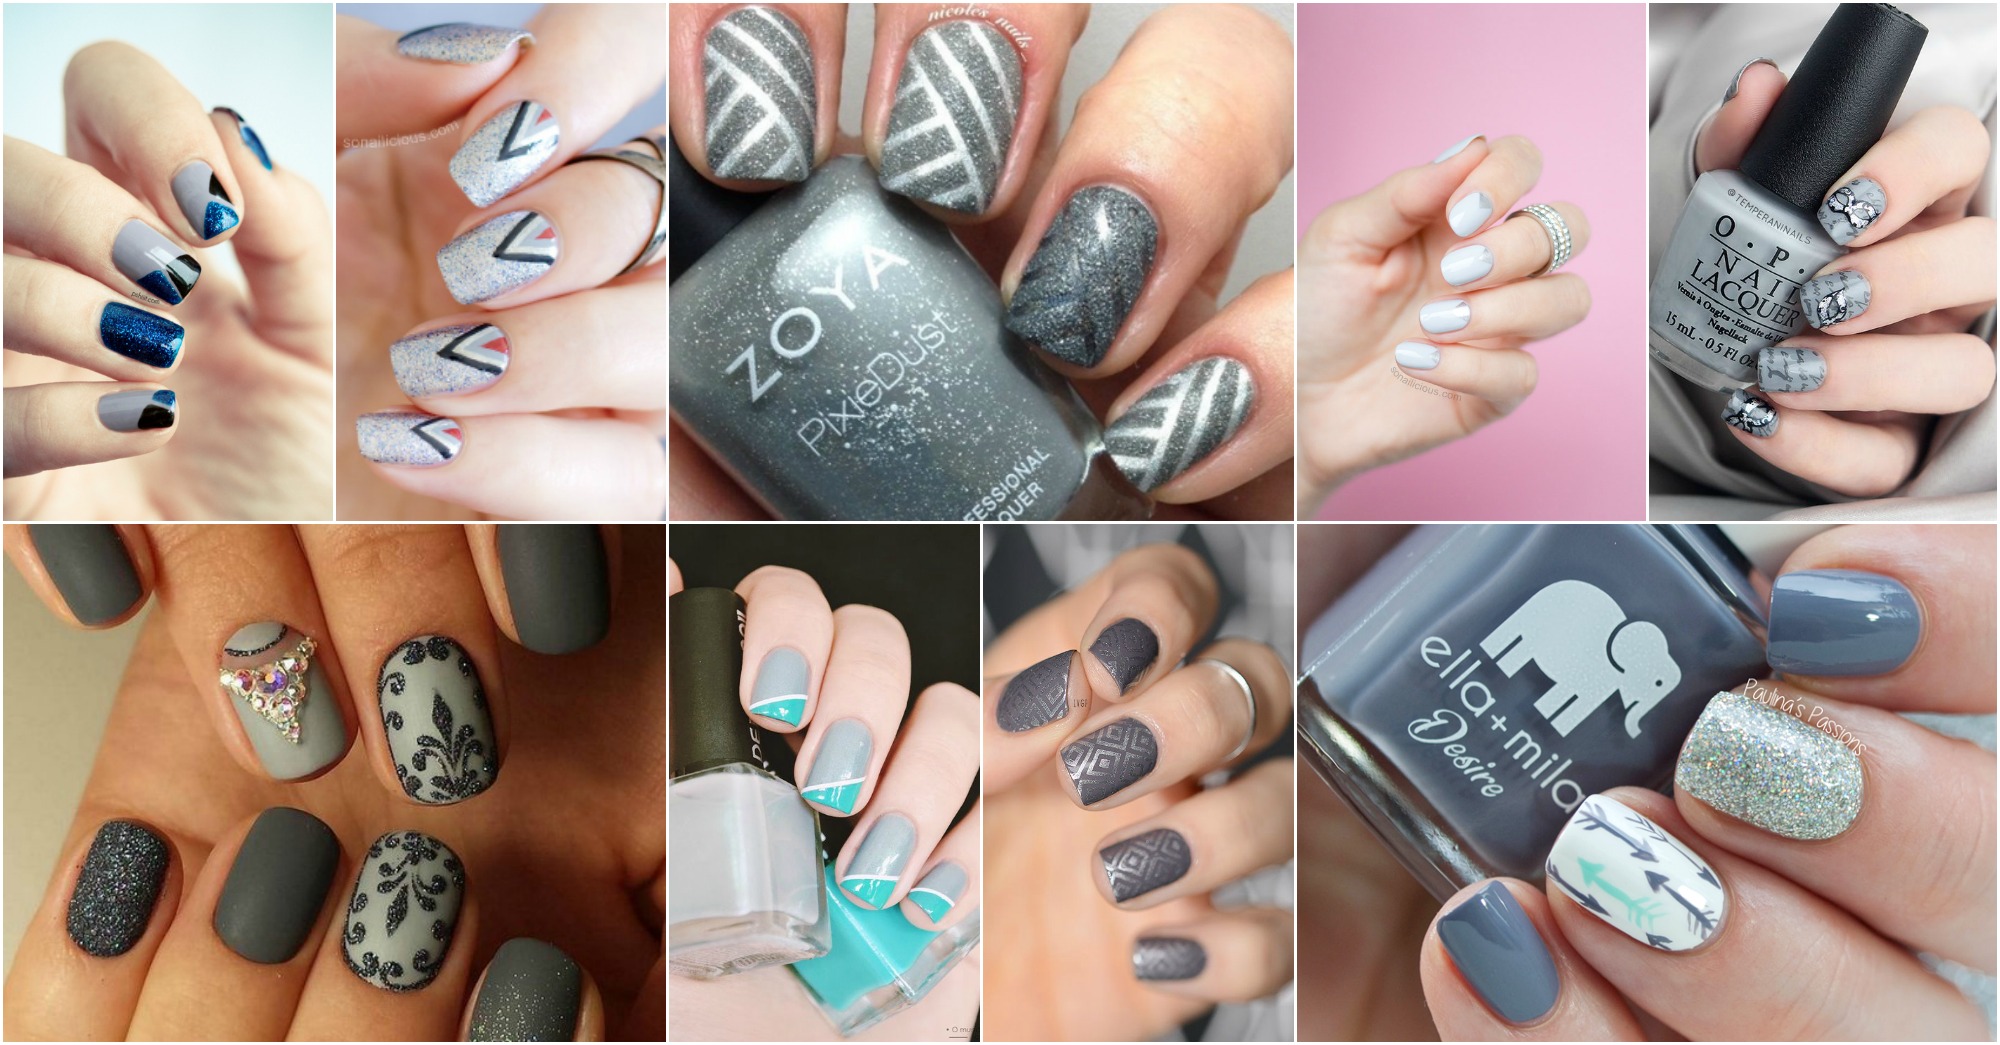 Grey Nail Designs: 10 Ideas to Try - wide 6